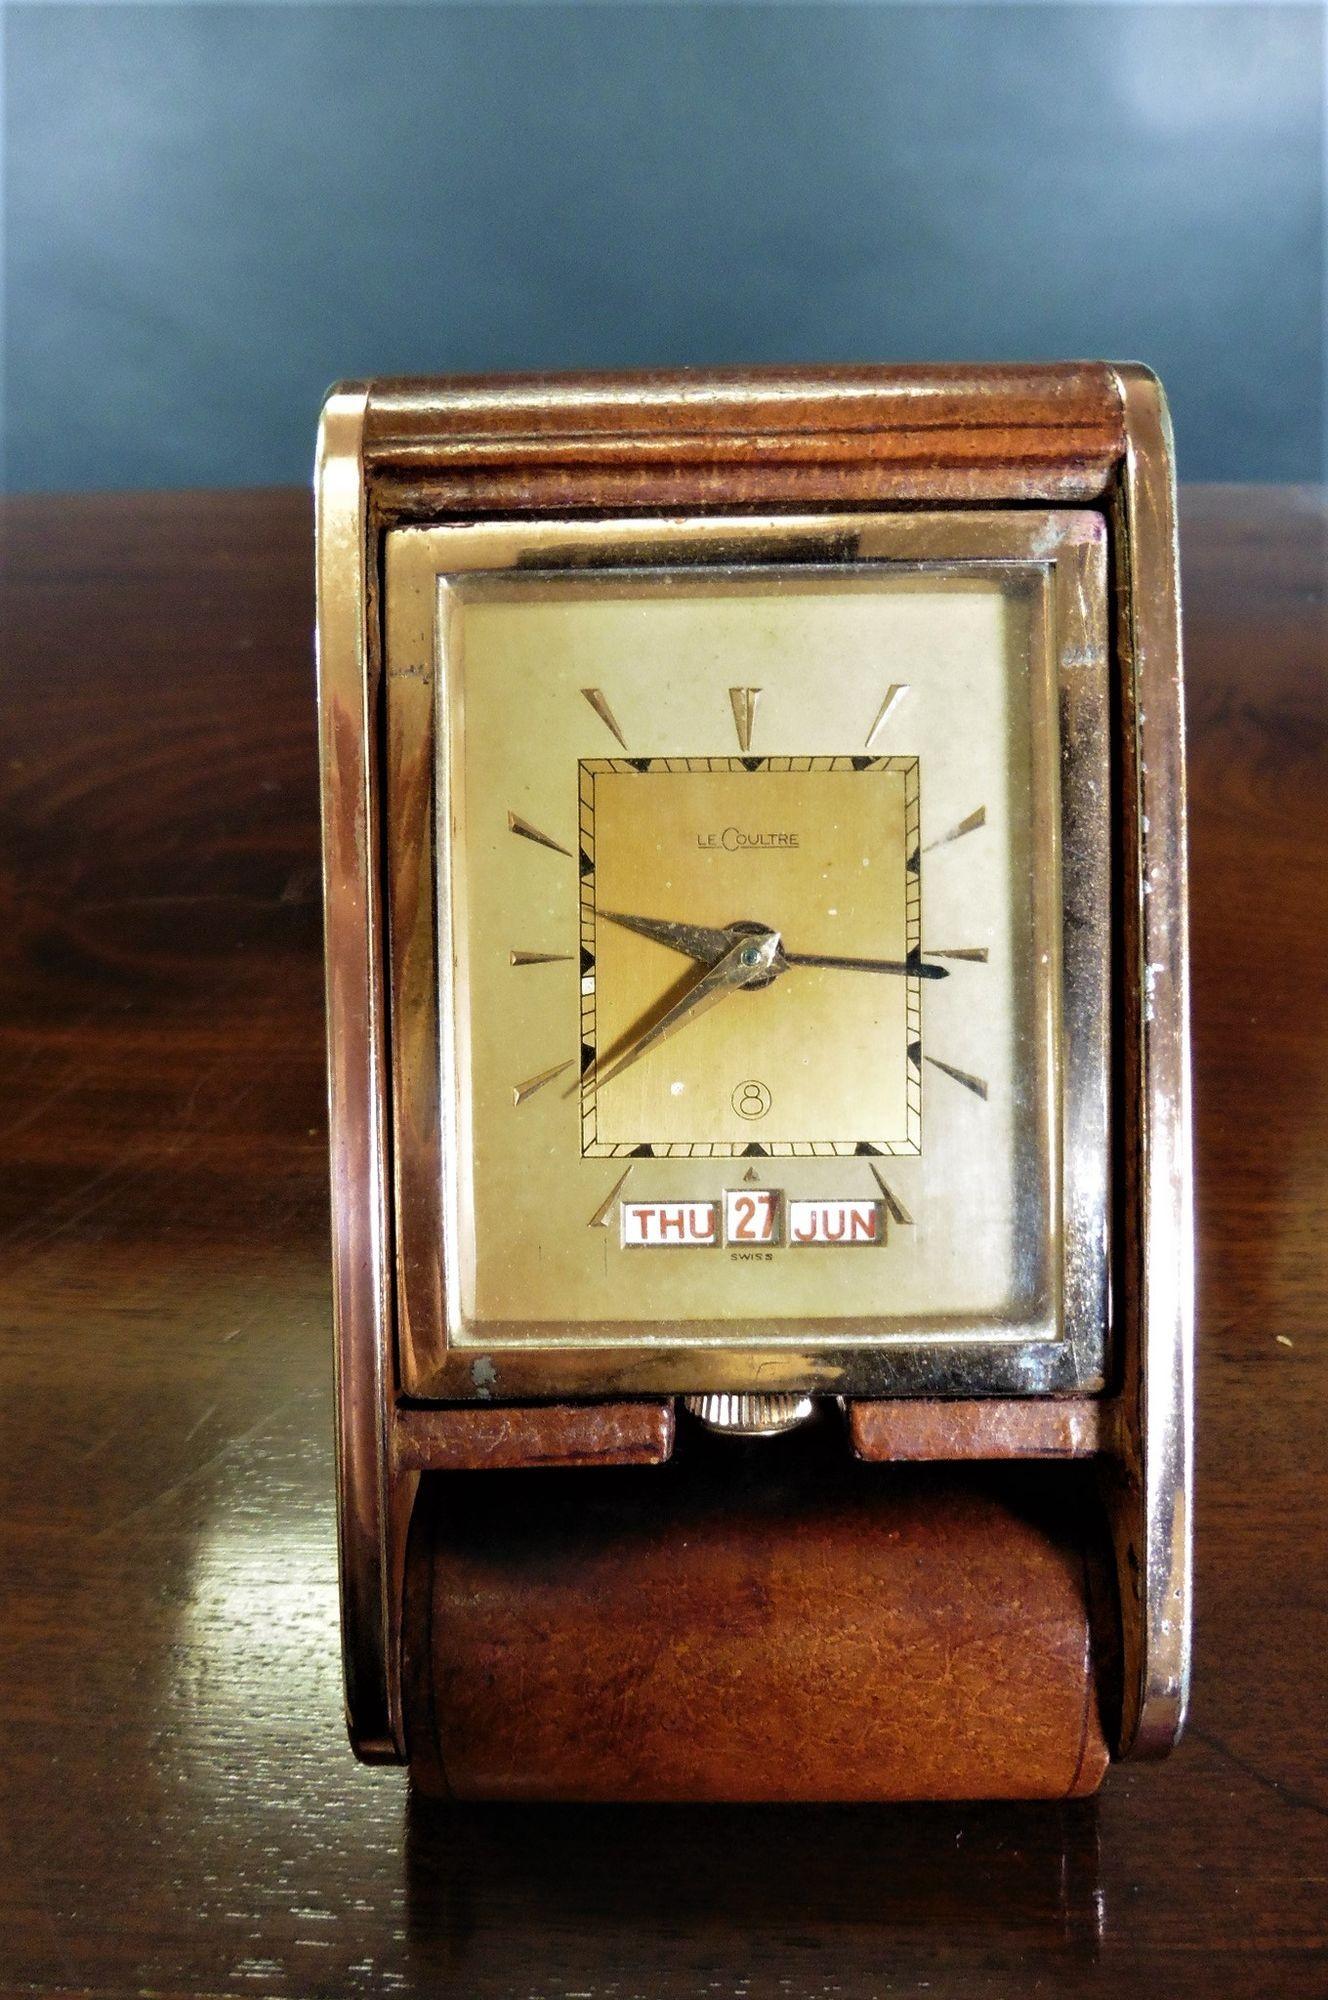 Travel alarm clock by Jaeger LeCoultre.
 
The case covered in fine brown leather, hinged to provide support and act as a cover when travelling. Copper sides and dial surround.
Gilded dial with original hands and calendar to the base signed Le